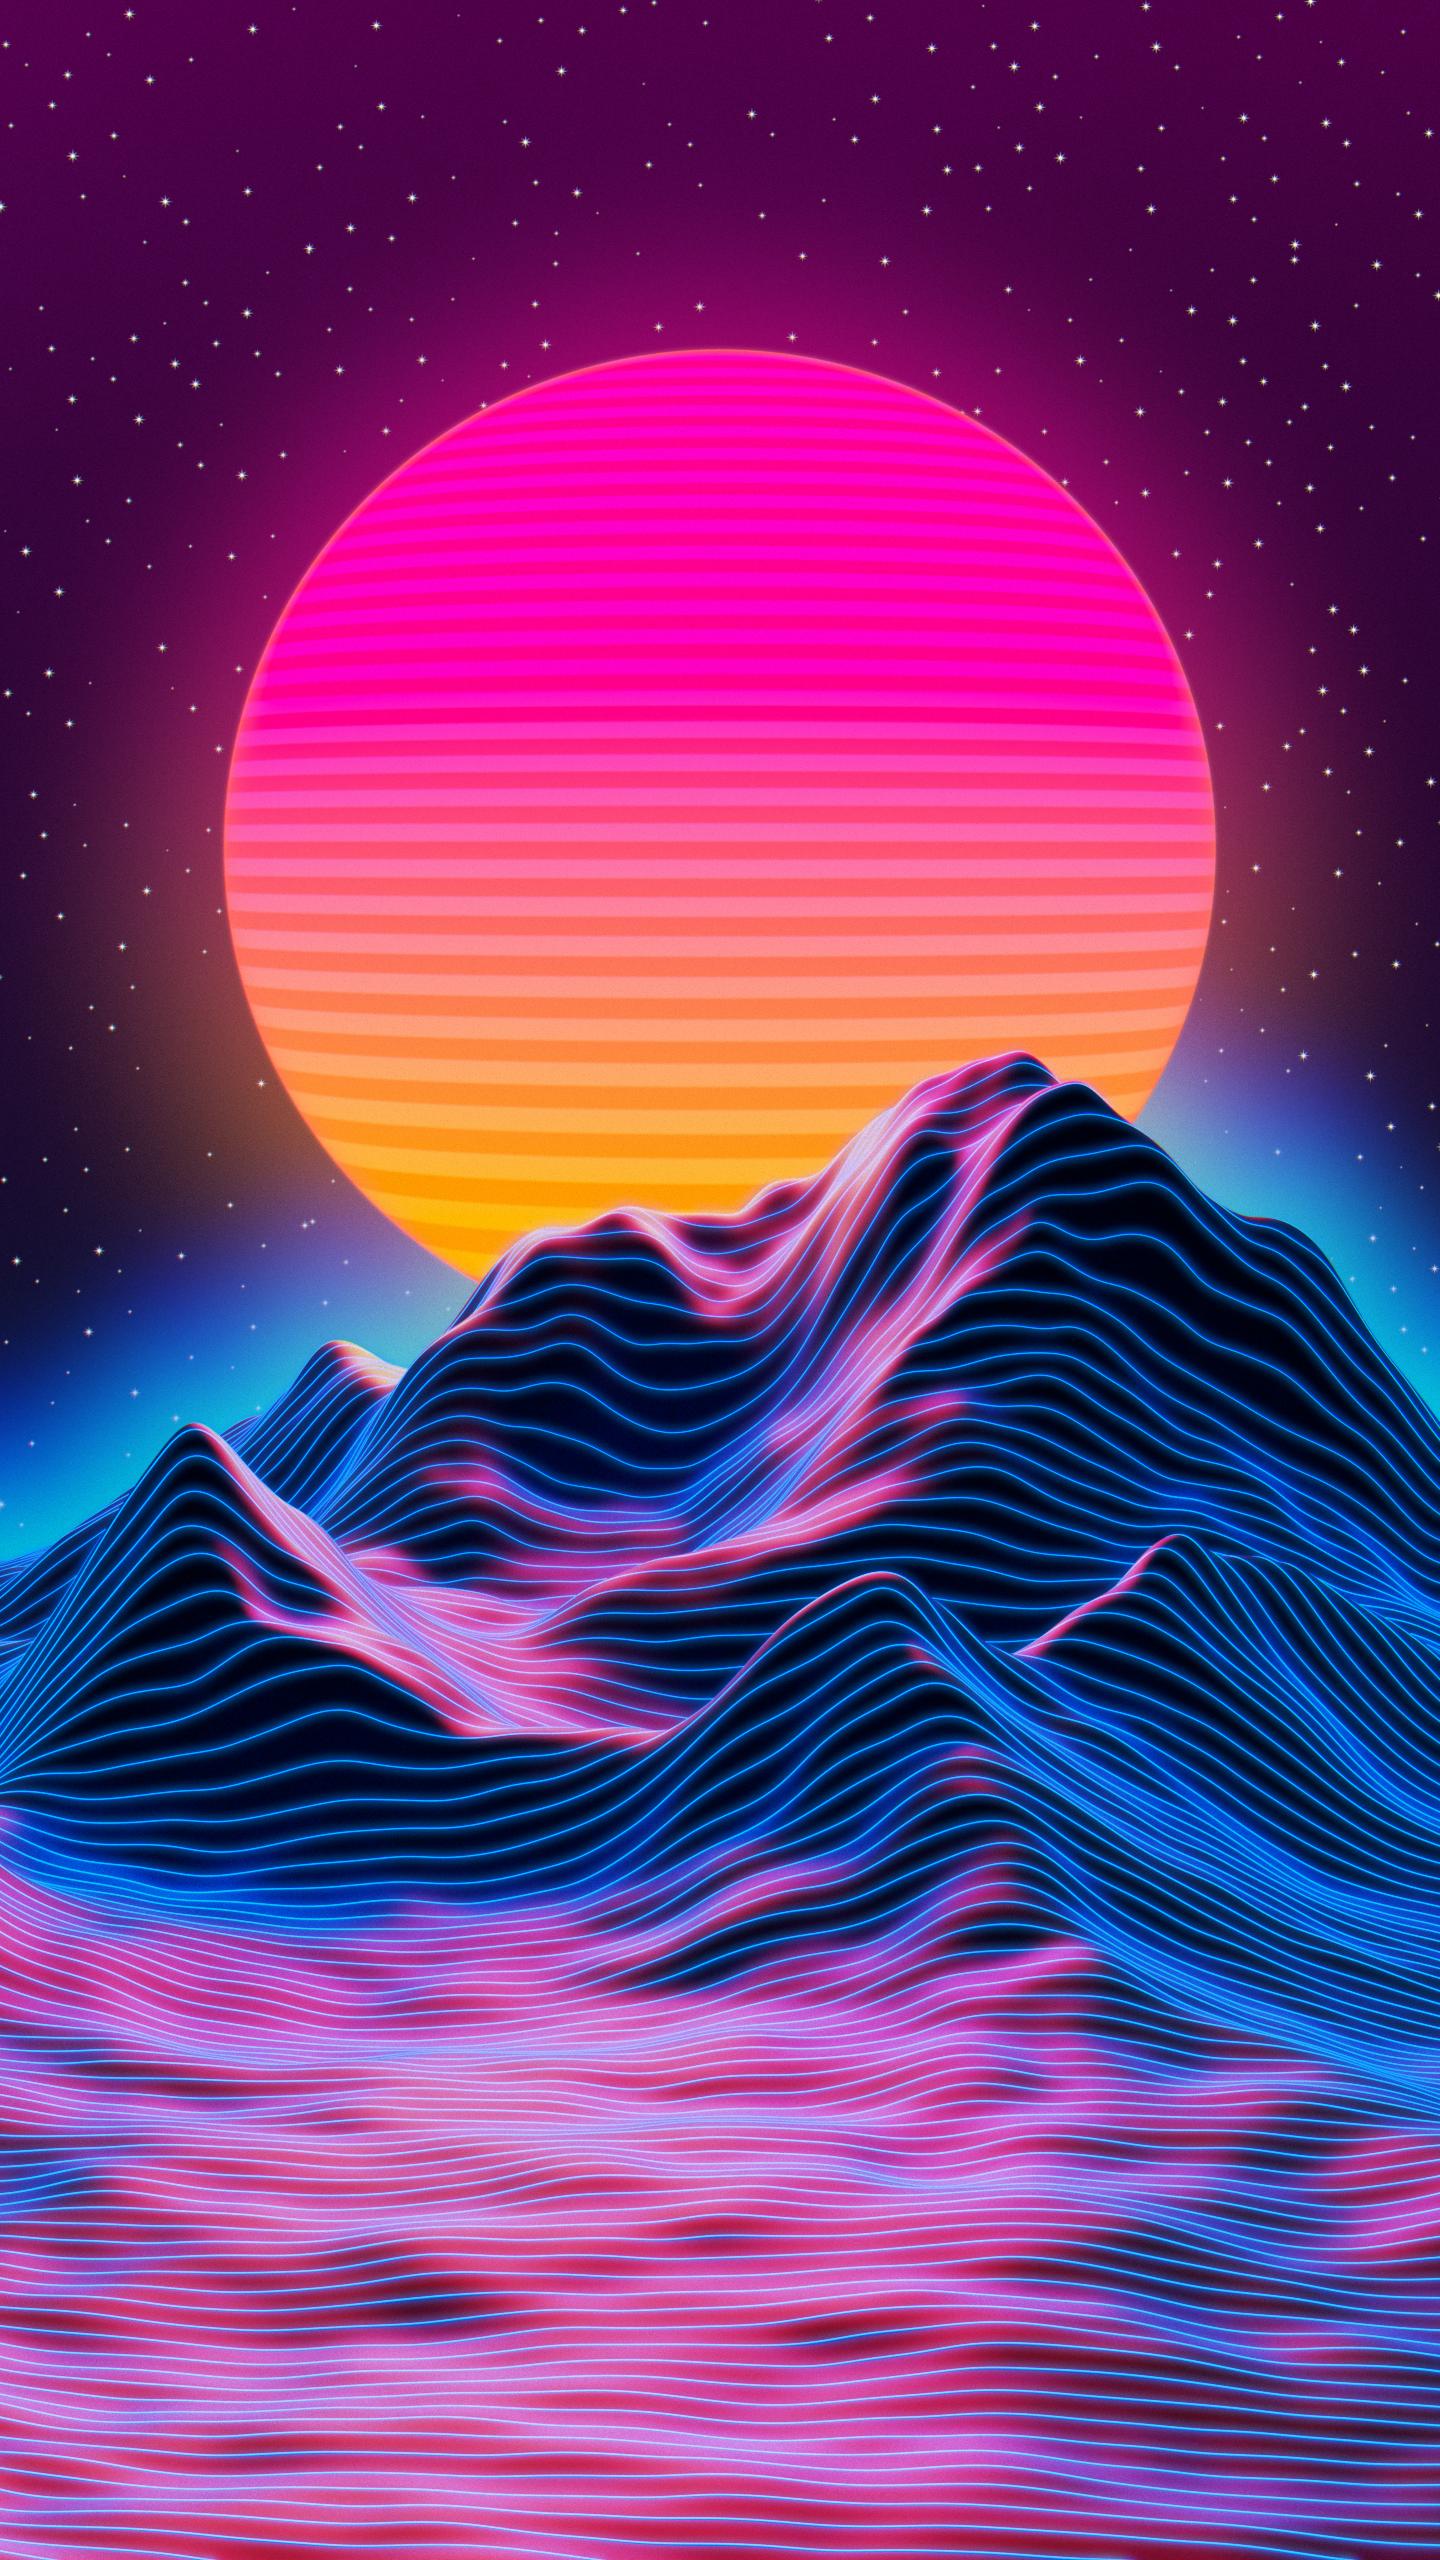 1440 x 2560 · png - Retro Sunset Wallpapers - Top Free Retro Sunset Backgrounds ...